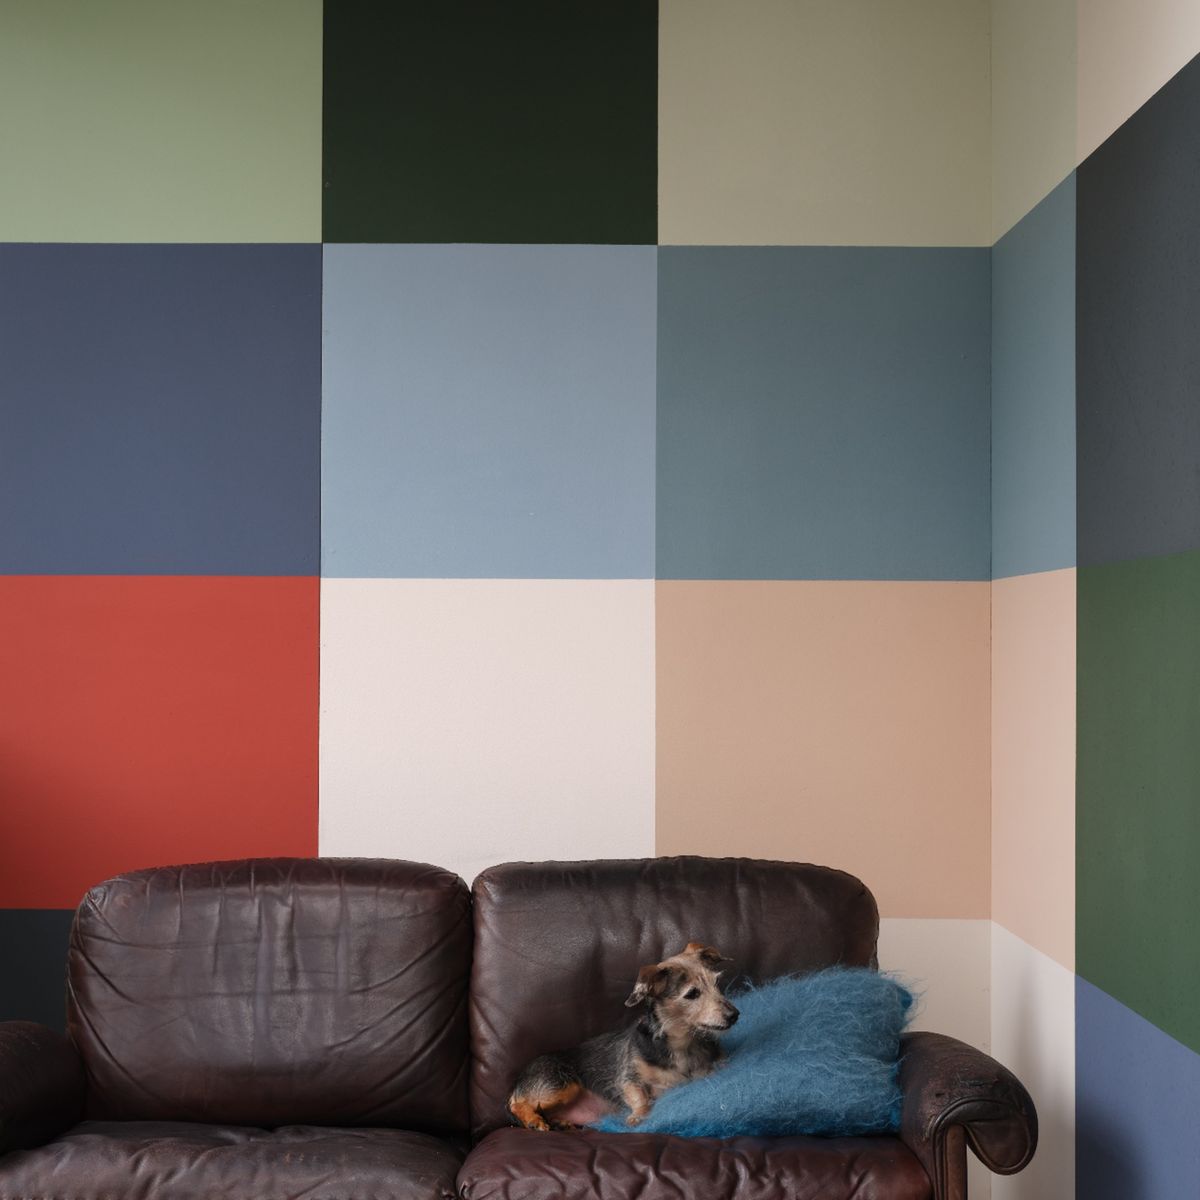 Farrow & Ball has launched a range of new colours for the first time in four years